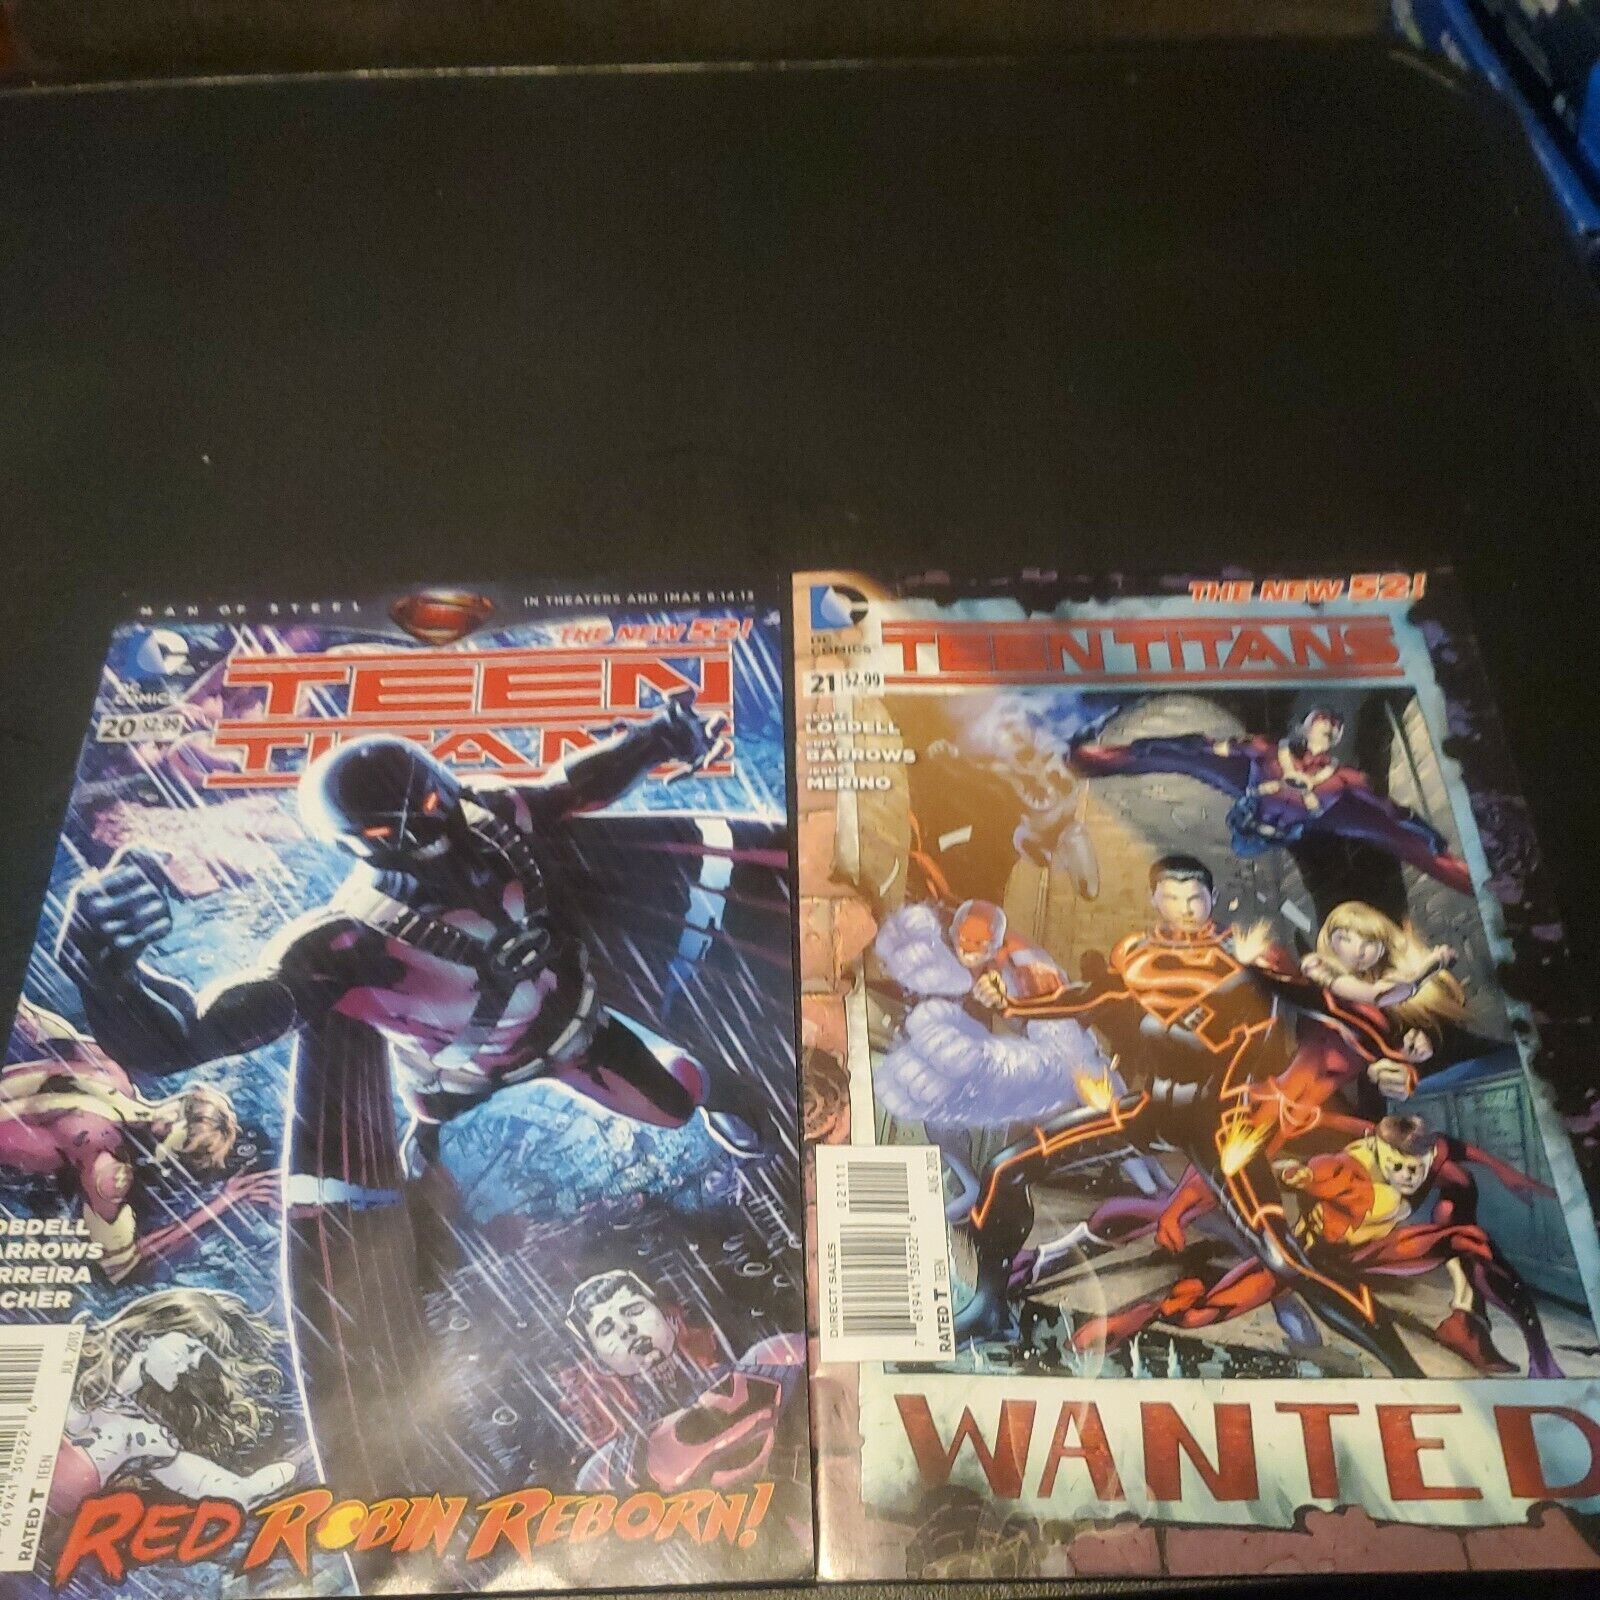 Teen Titans #20,#21 The New 52 Red Robin Reborn & Wanted [DC Comics]